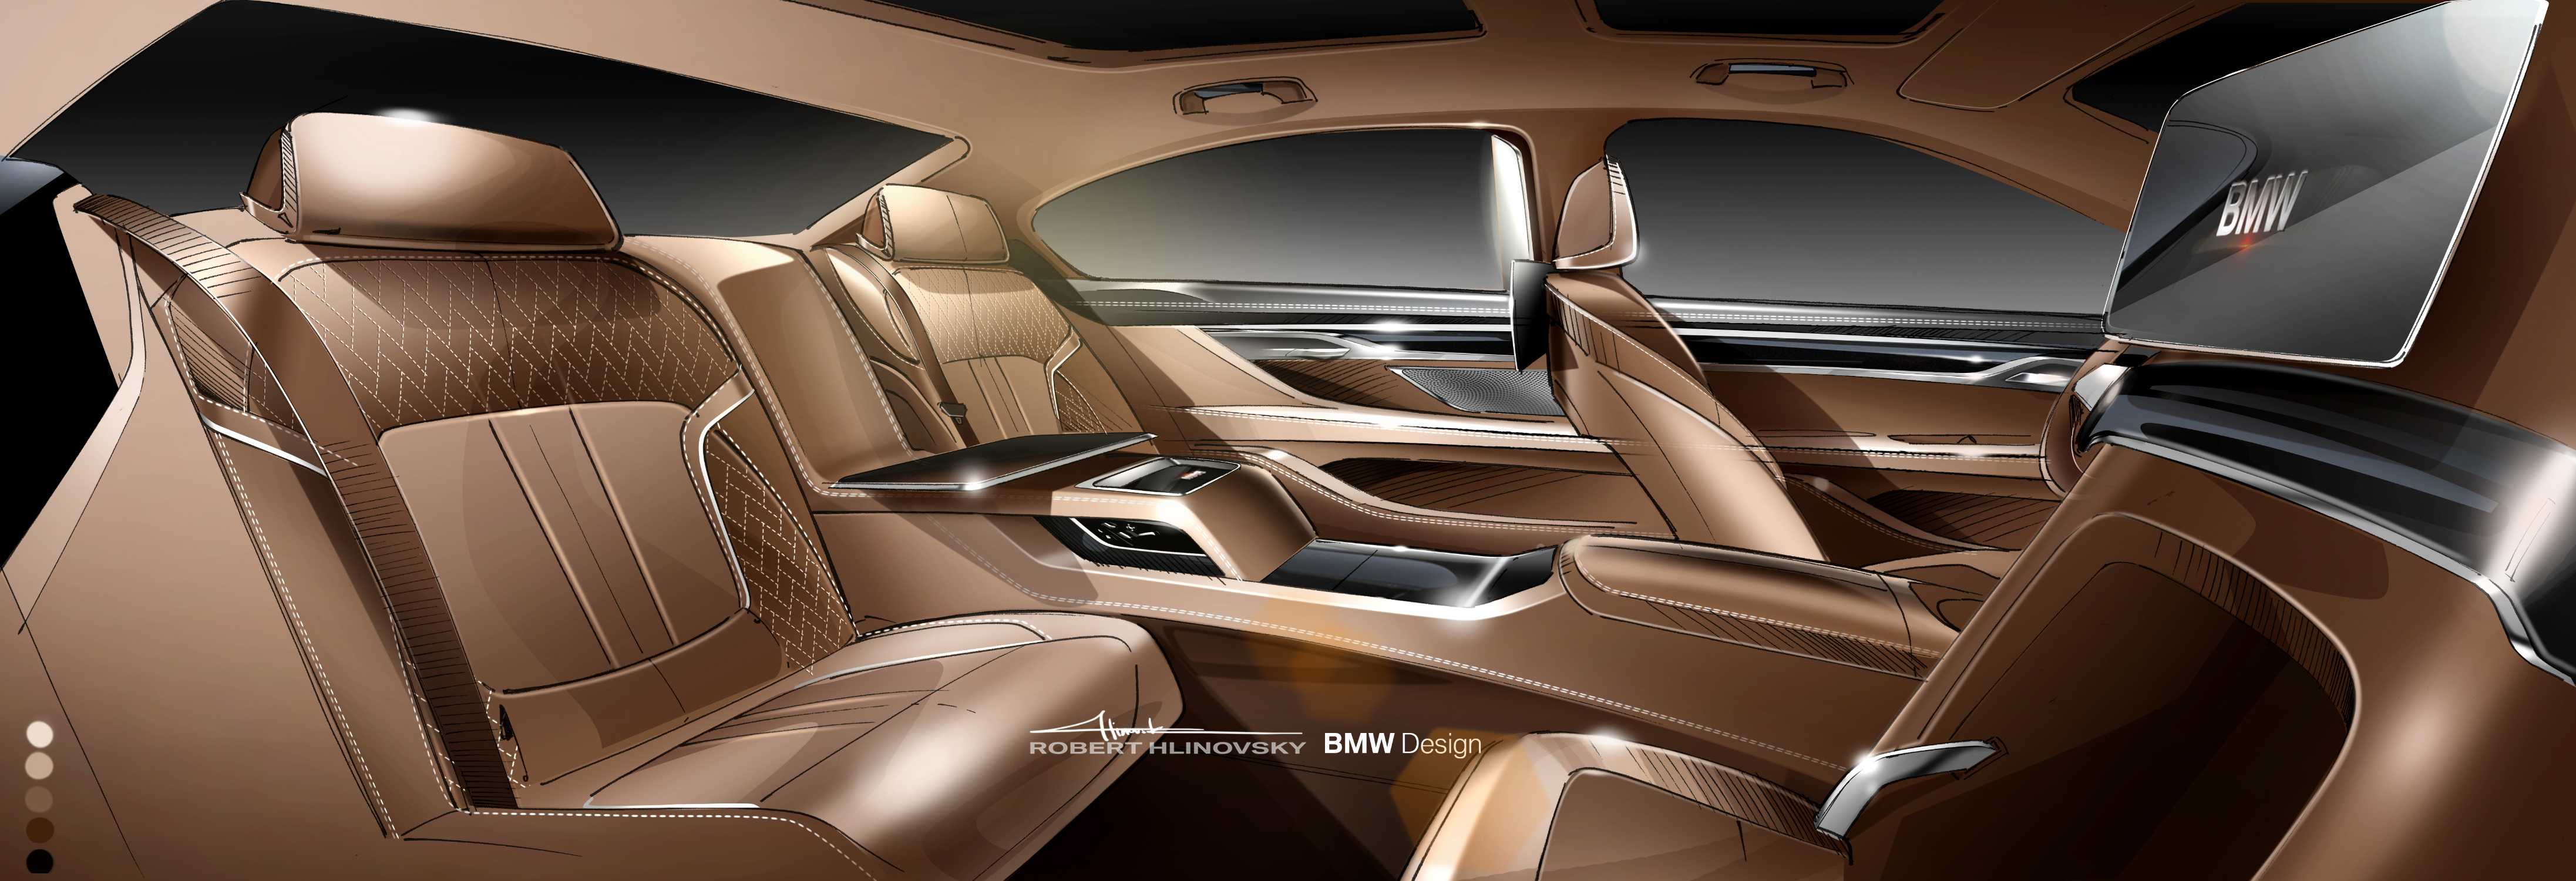 the new bmw 7 series interior sketch bmw individual